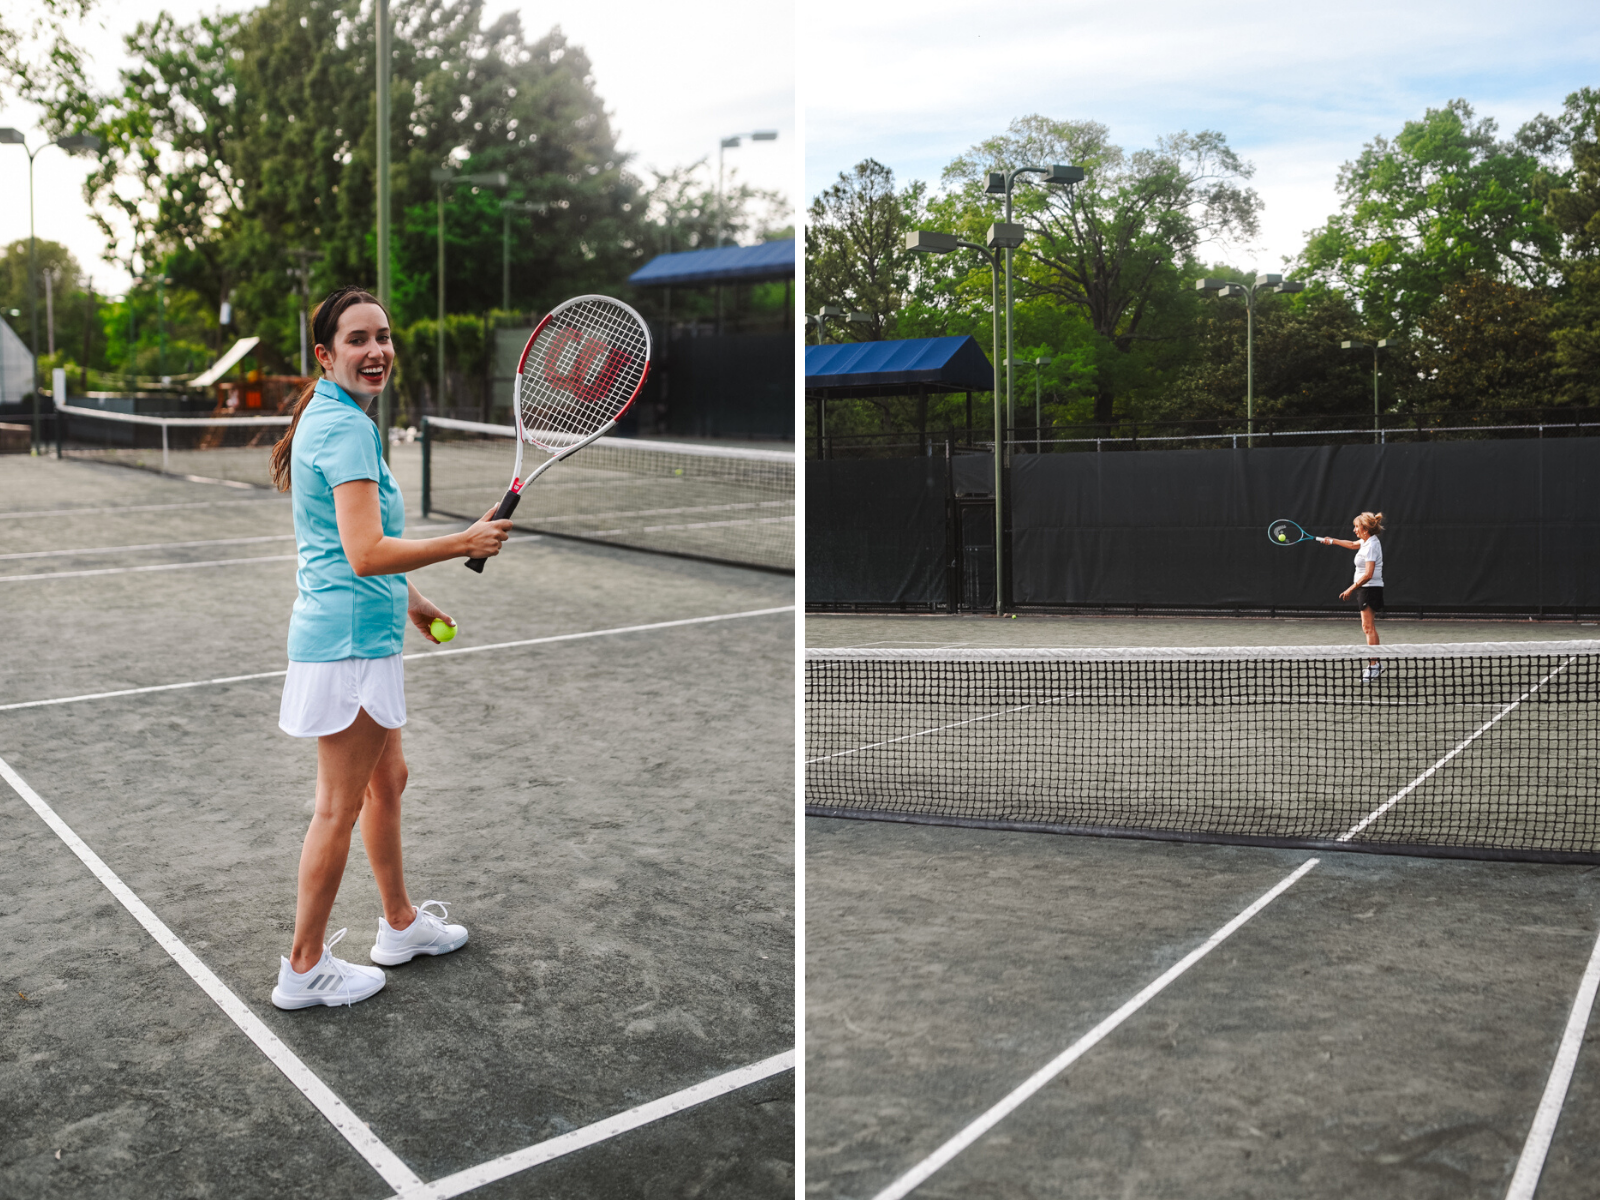 Tennis Outfits by popular Memphis fashion blog, Lone Star Looking Glass: image of two women standing together on a tennis court and and playing tennis while wearing tennis outfits.